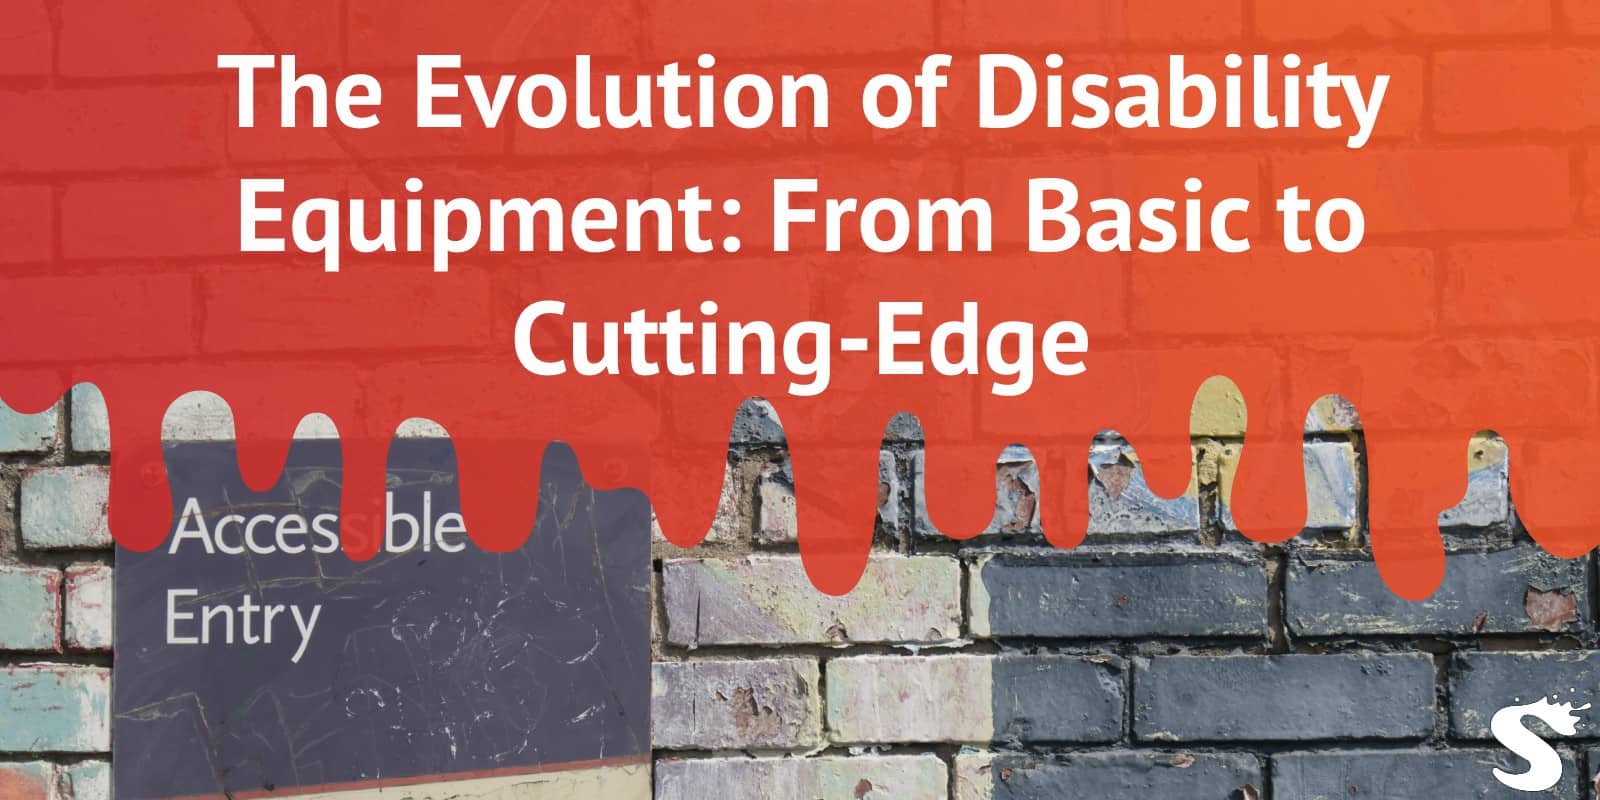 The Evolution of Disability Equipment: From Basic to Cutting-Edge